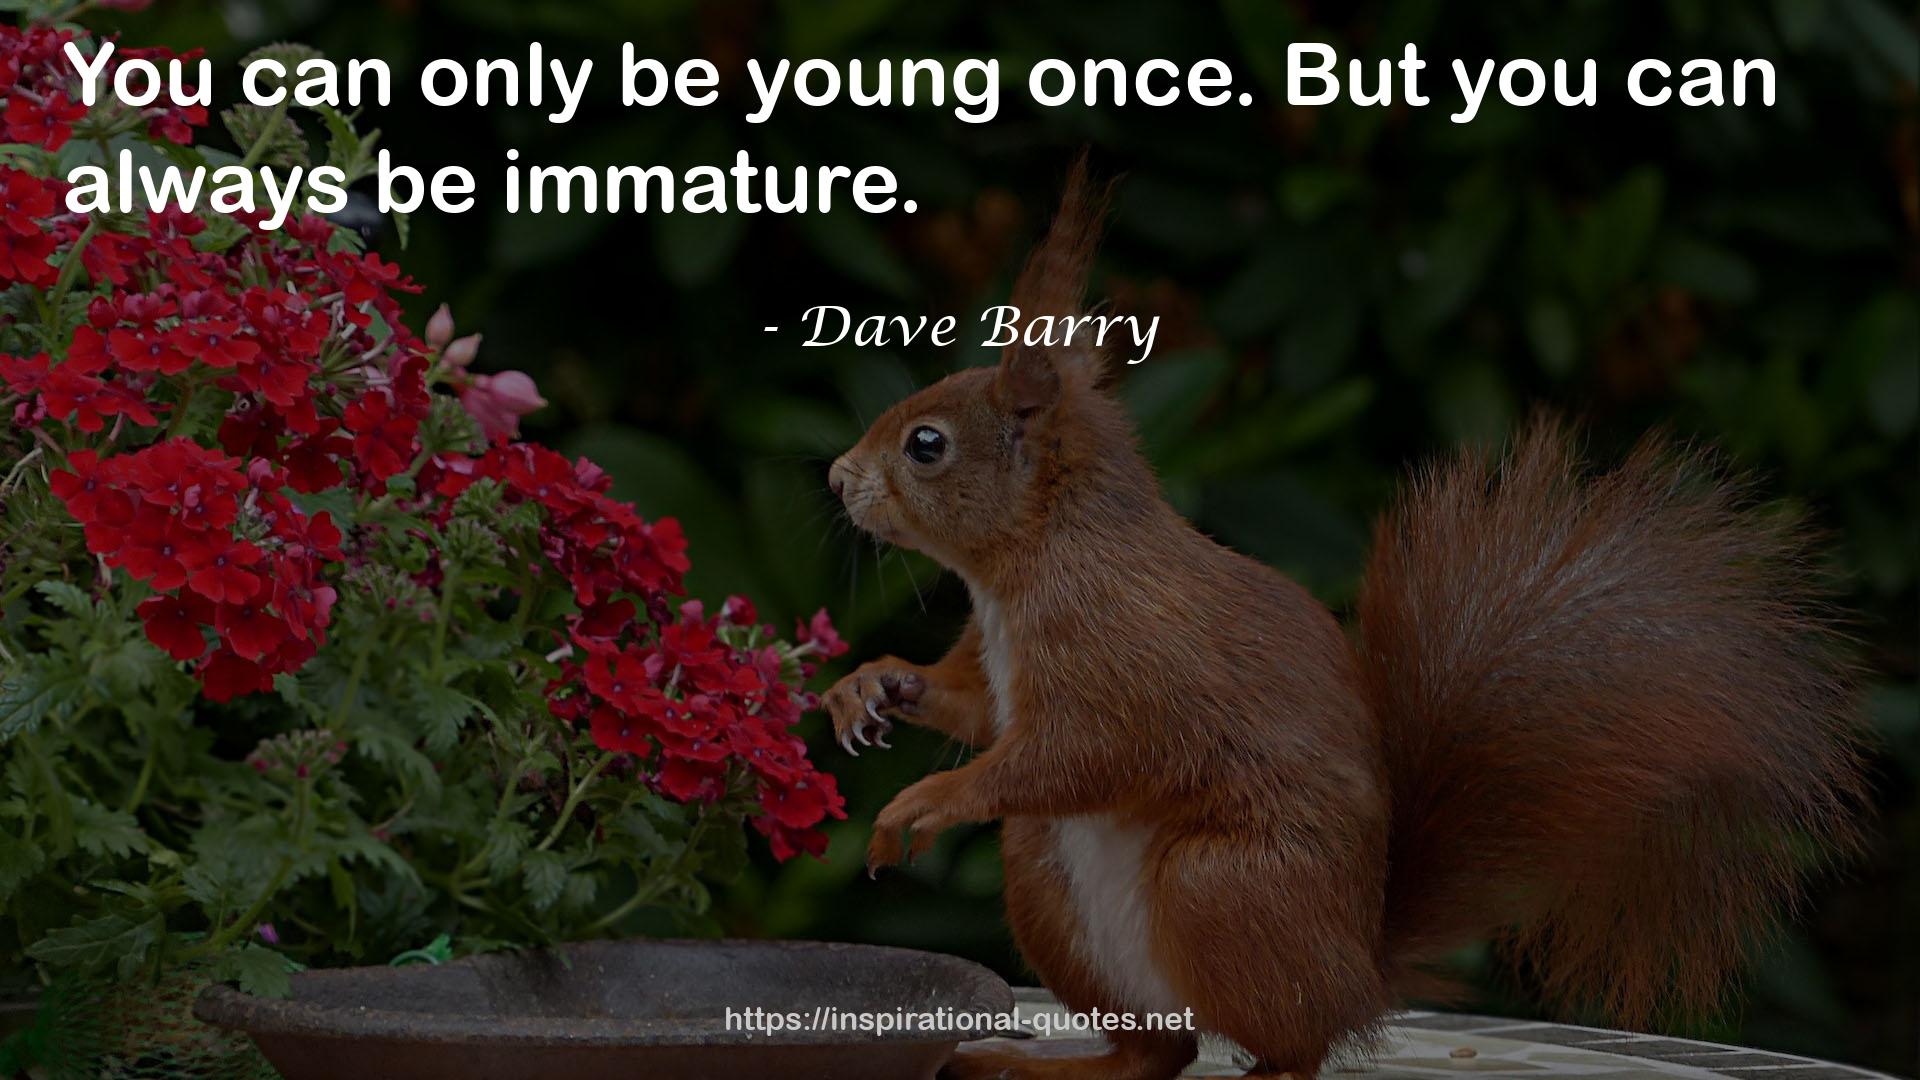 Dave Barry QUOTES